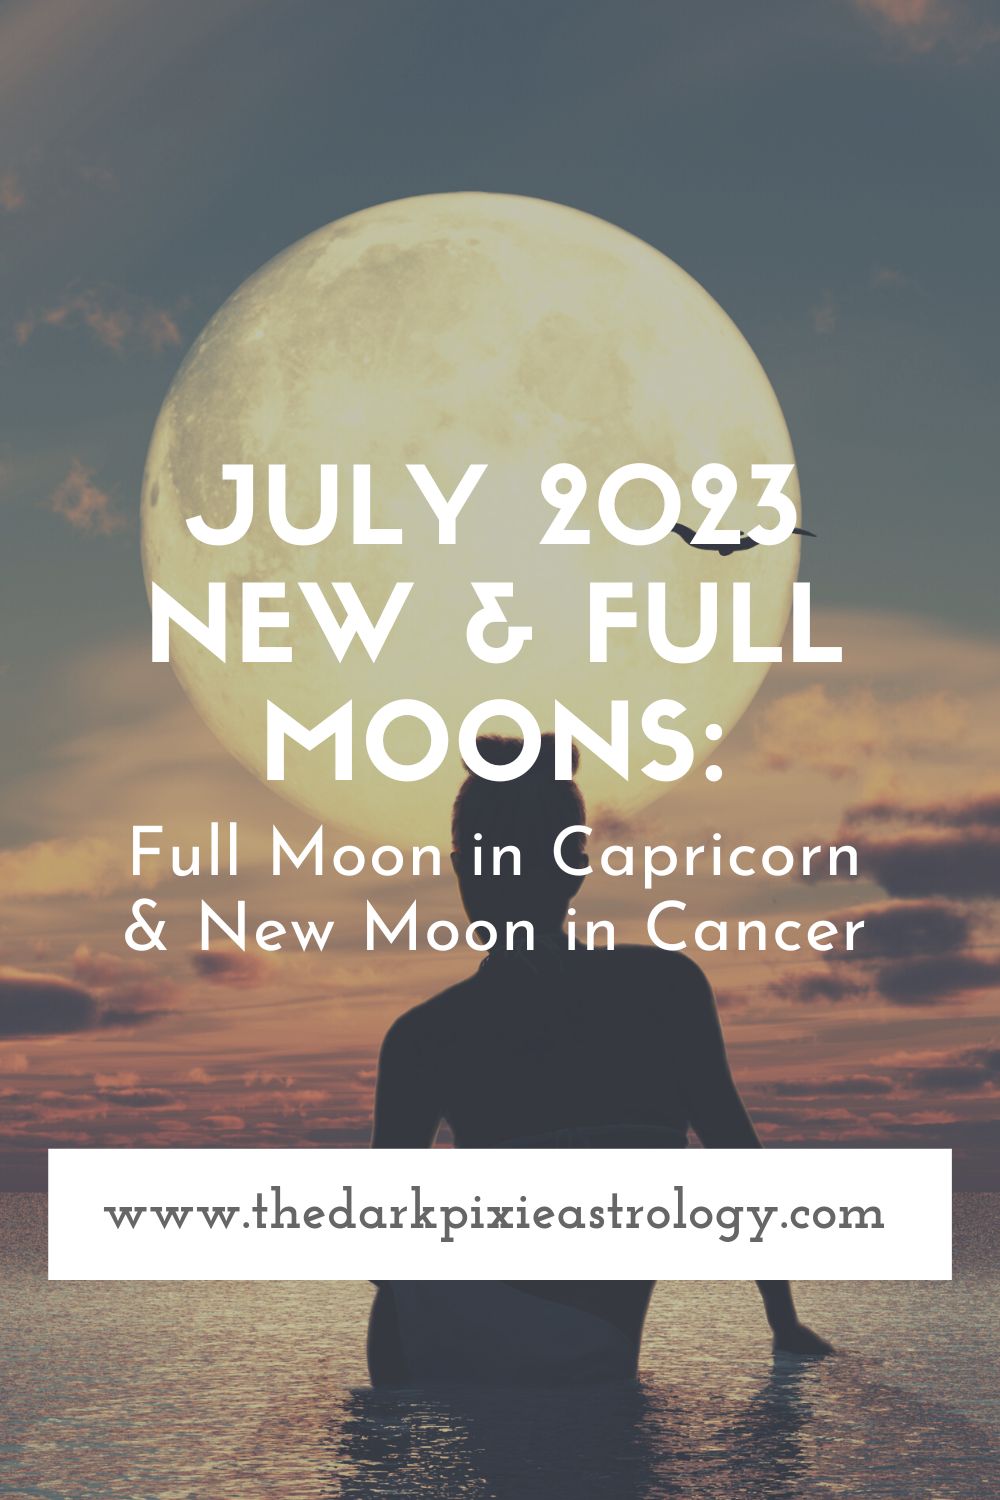 July 2023 New & Full Moons Full Moon in Capricorn & New Moon in Cancer